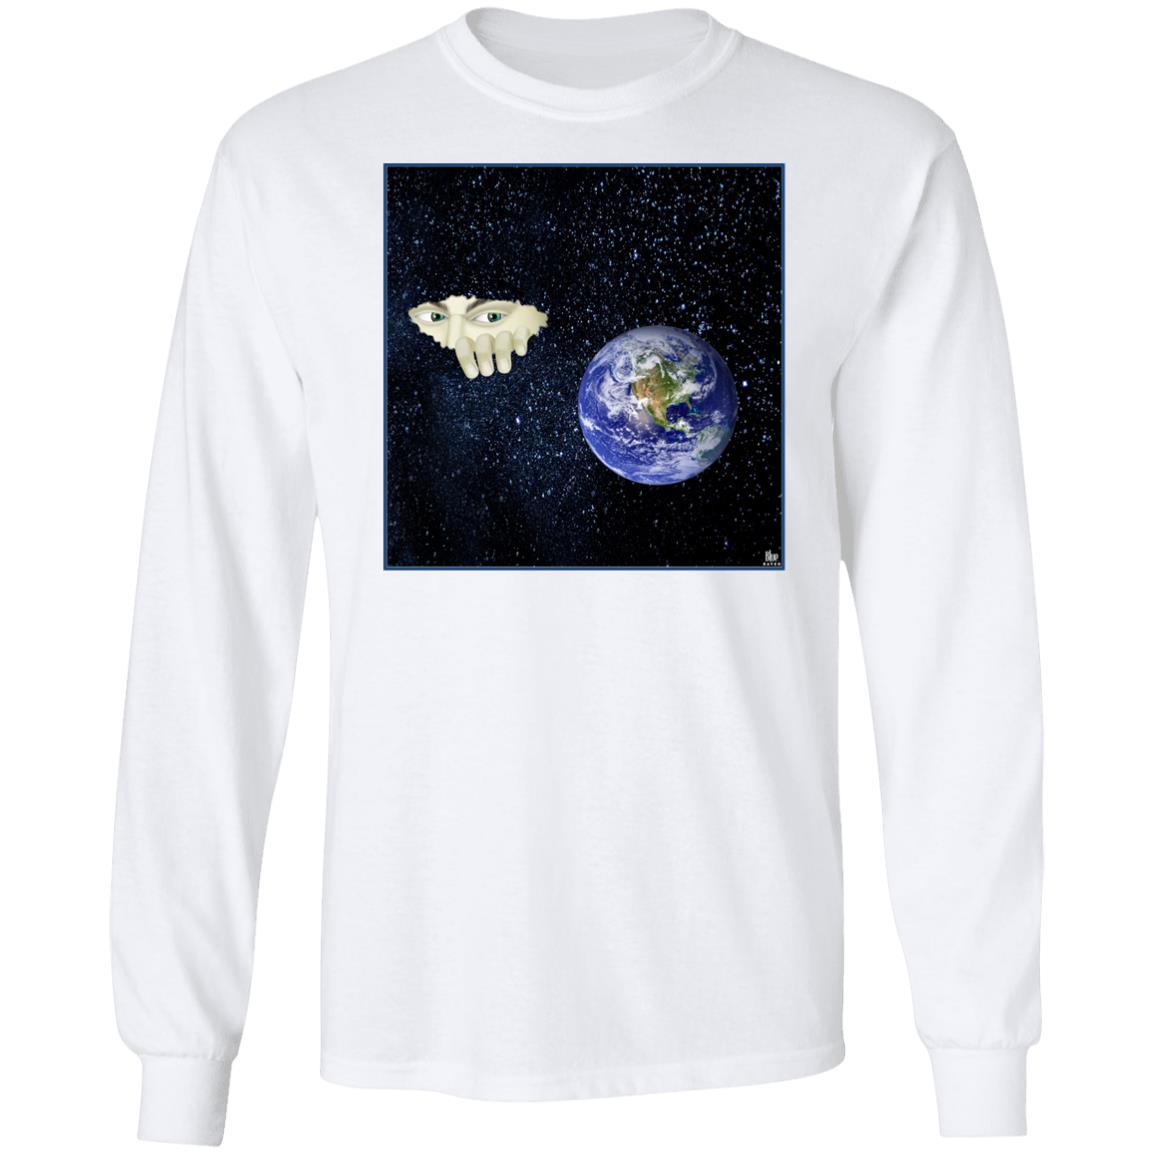 Somewhere Out There - Men's Long Sleeve T-Shirt